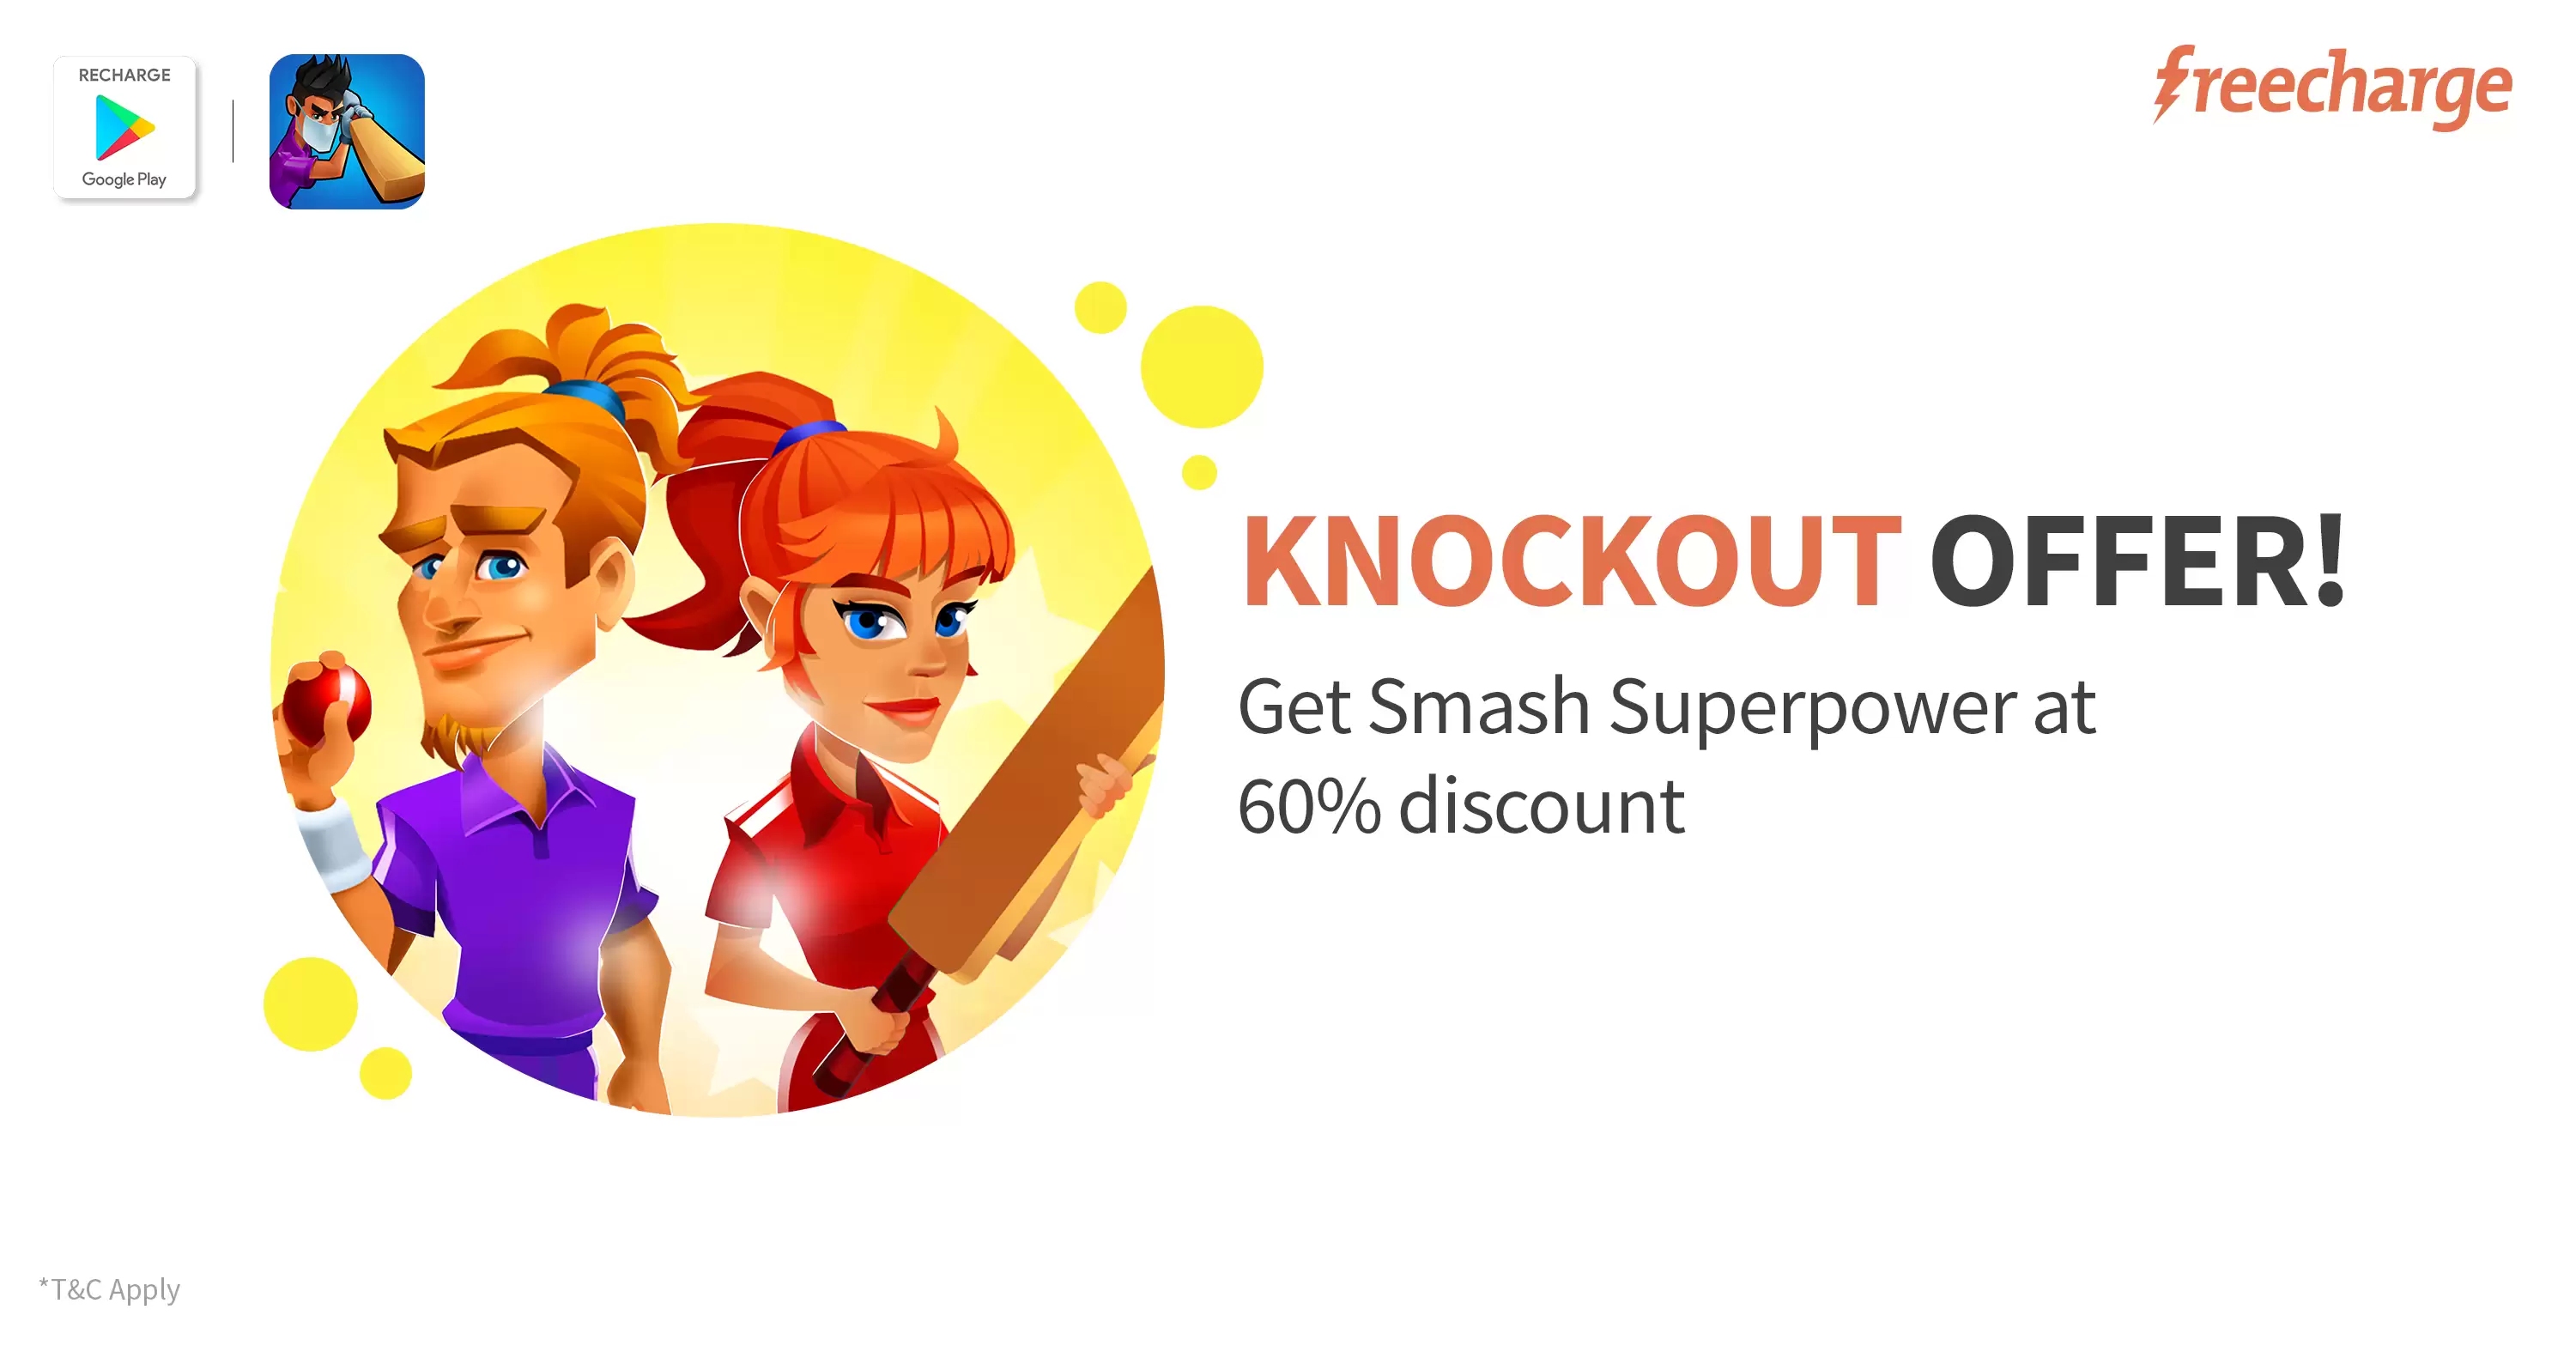 Smash Superpowe At 60% Discount Buy A Google Play Recharge Code With Freecharge